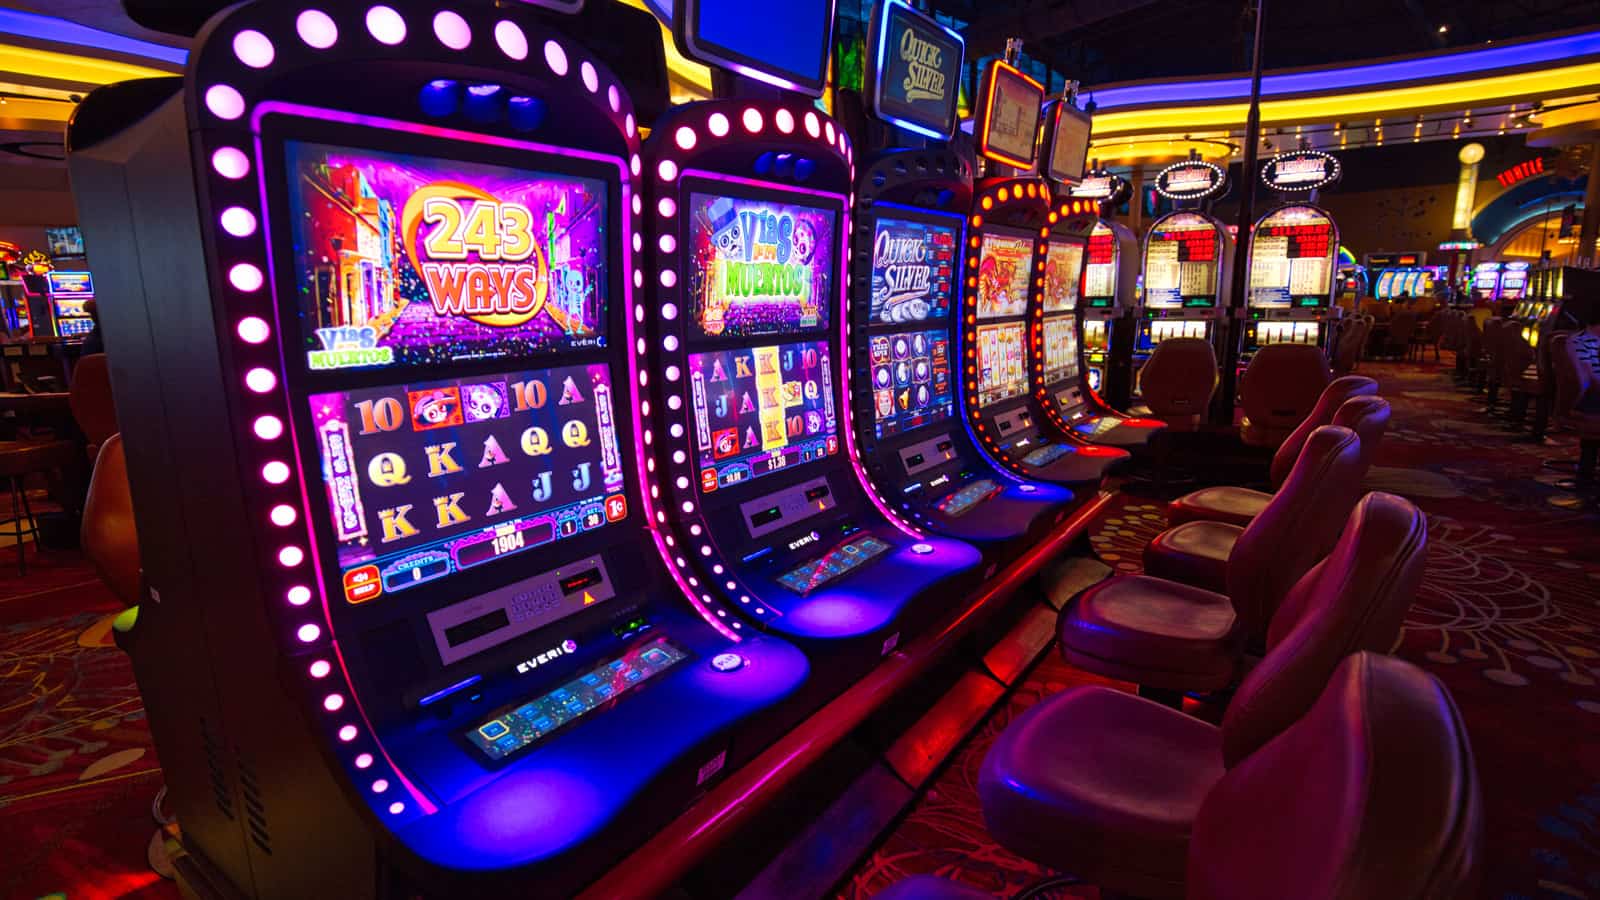 New Slot Games | The Hottest New Online Slots to Land This Month